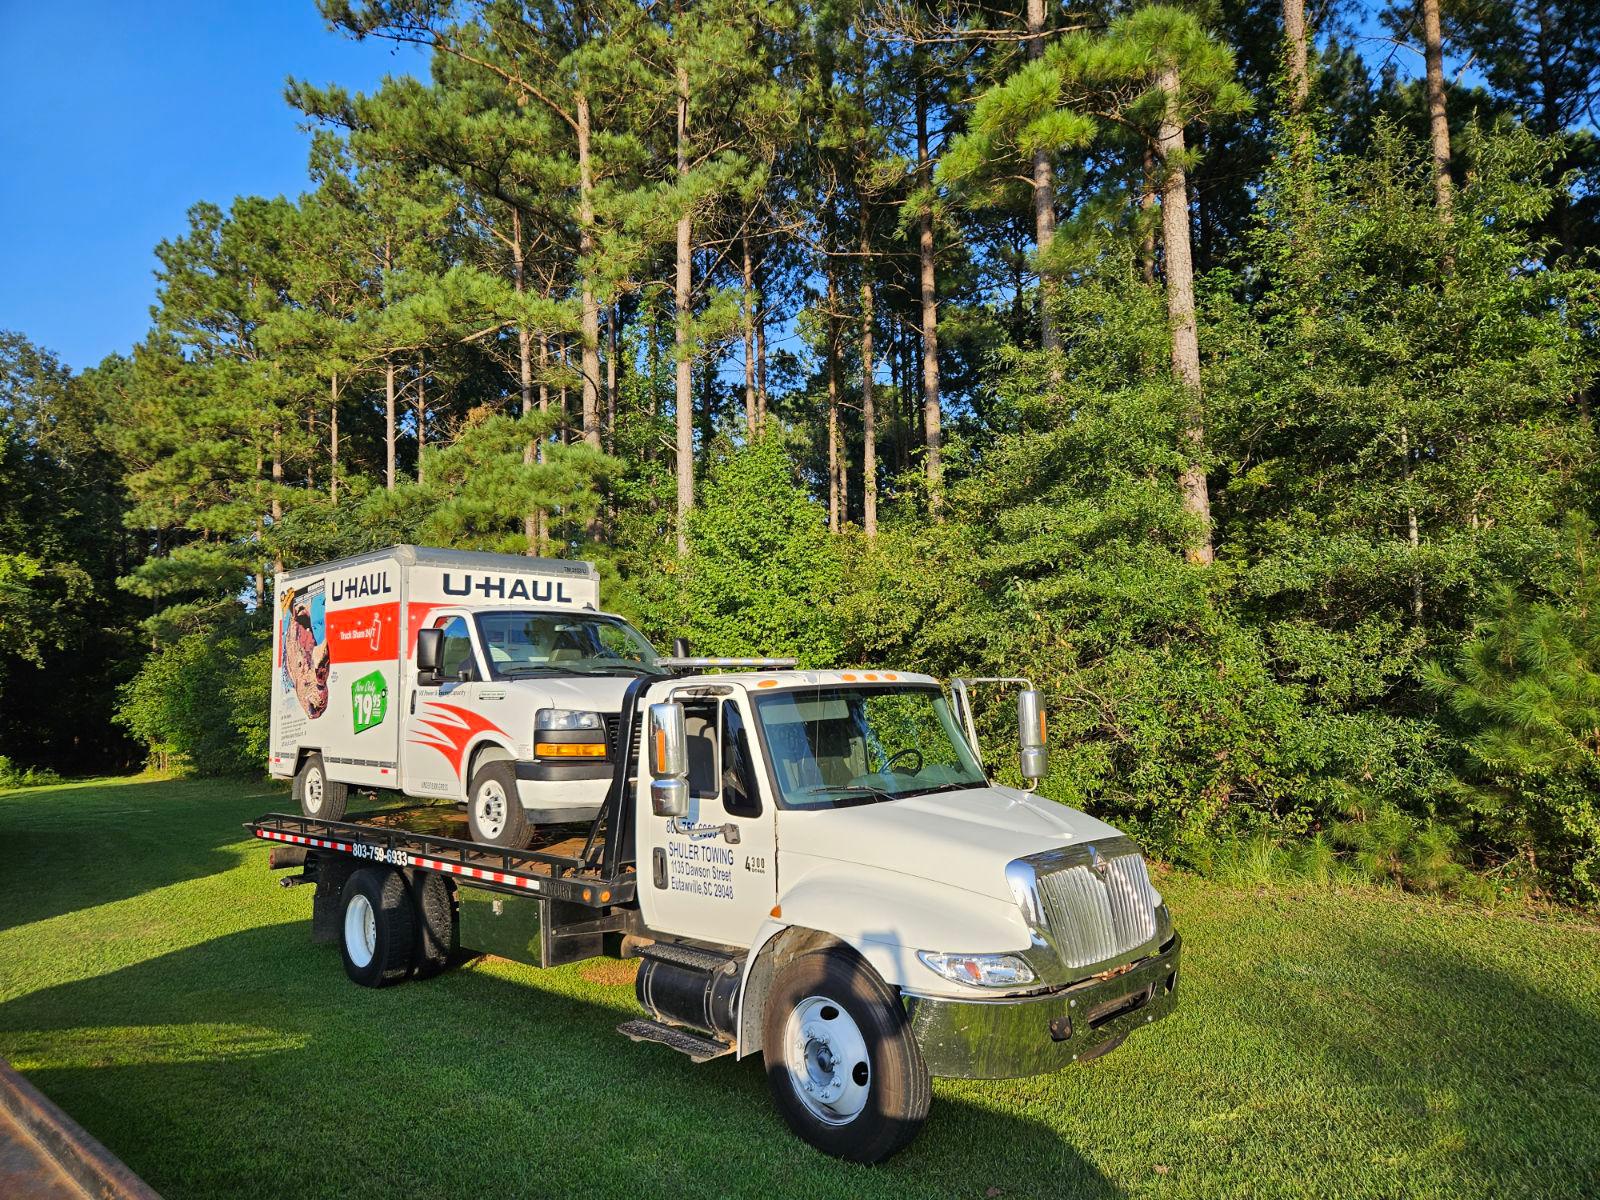 Shuler Towing, LLC provides emergency tow truck services for those unexpected roadside situations. When you're facing vehicle troubles, our dedicated team is available 24/7 to provide immediate towing assistance, getting you back on the road as soon as possible.